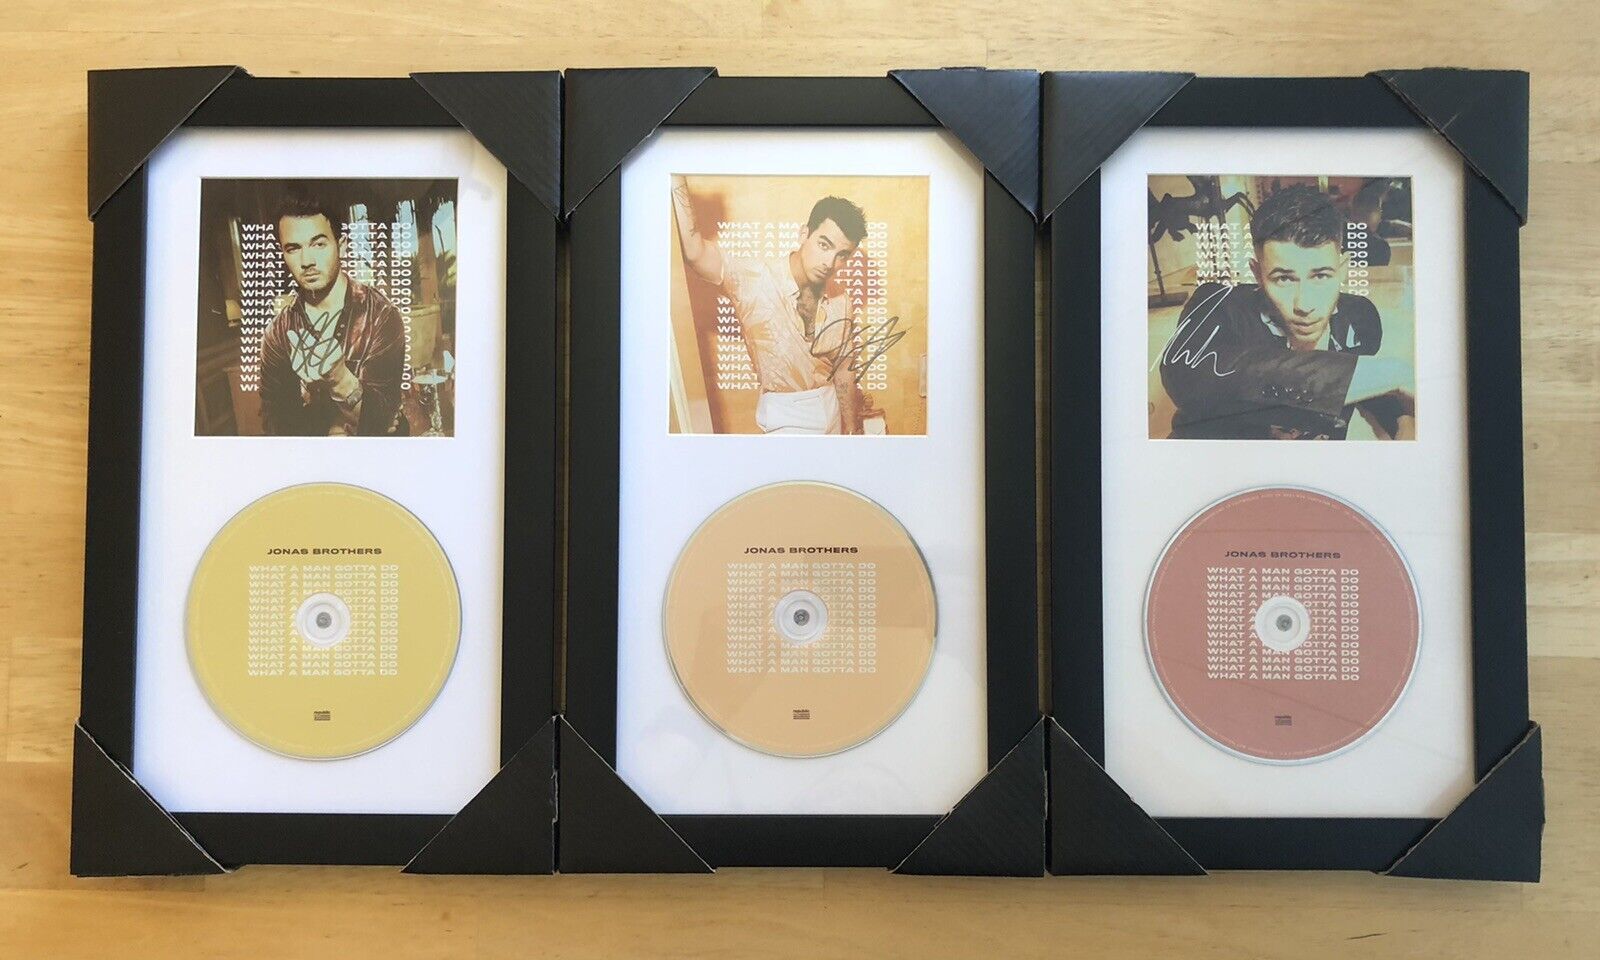 Jonas Brothers "What A Man Gotta Do" SIGNED Framed CDs Lot of 3  Без бренда